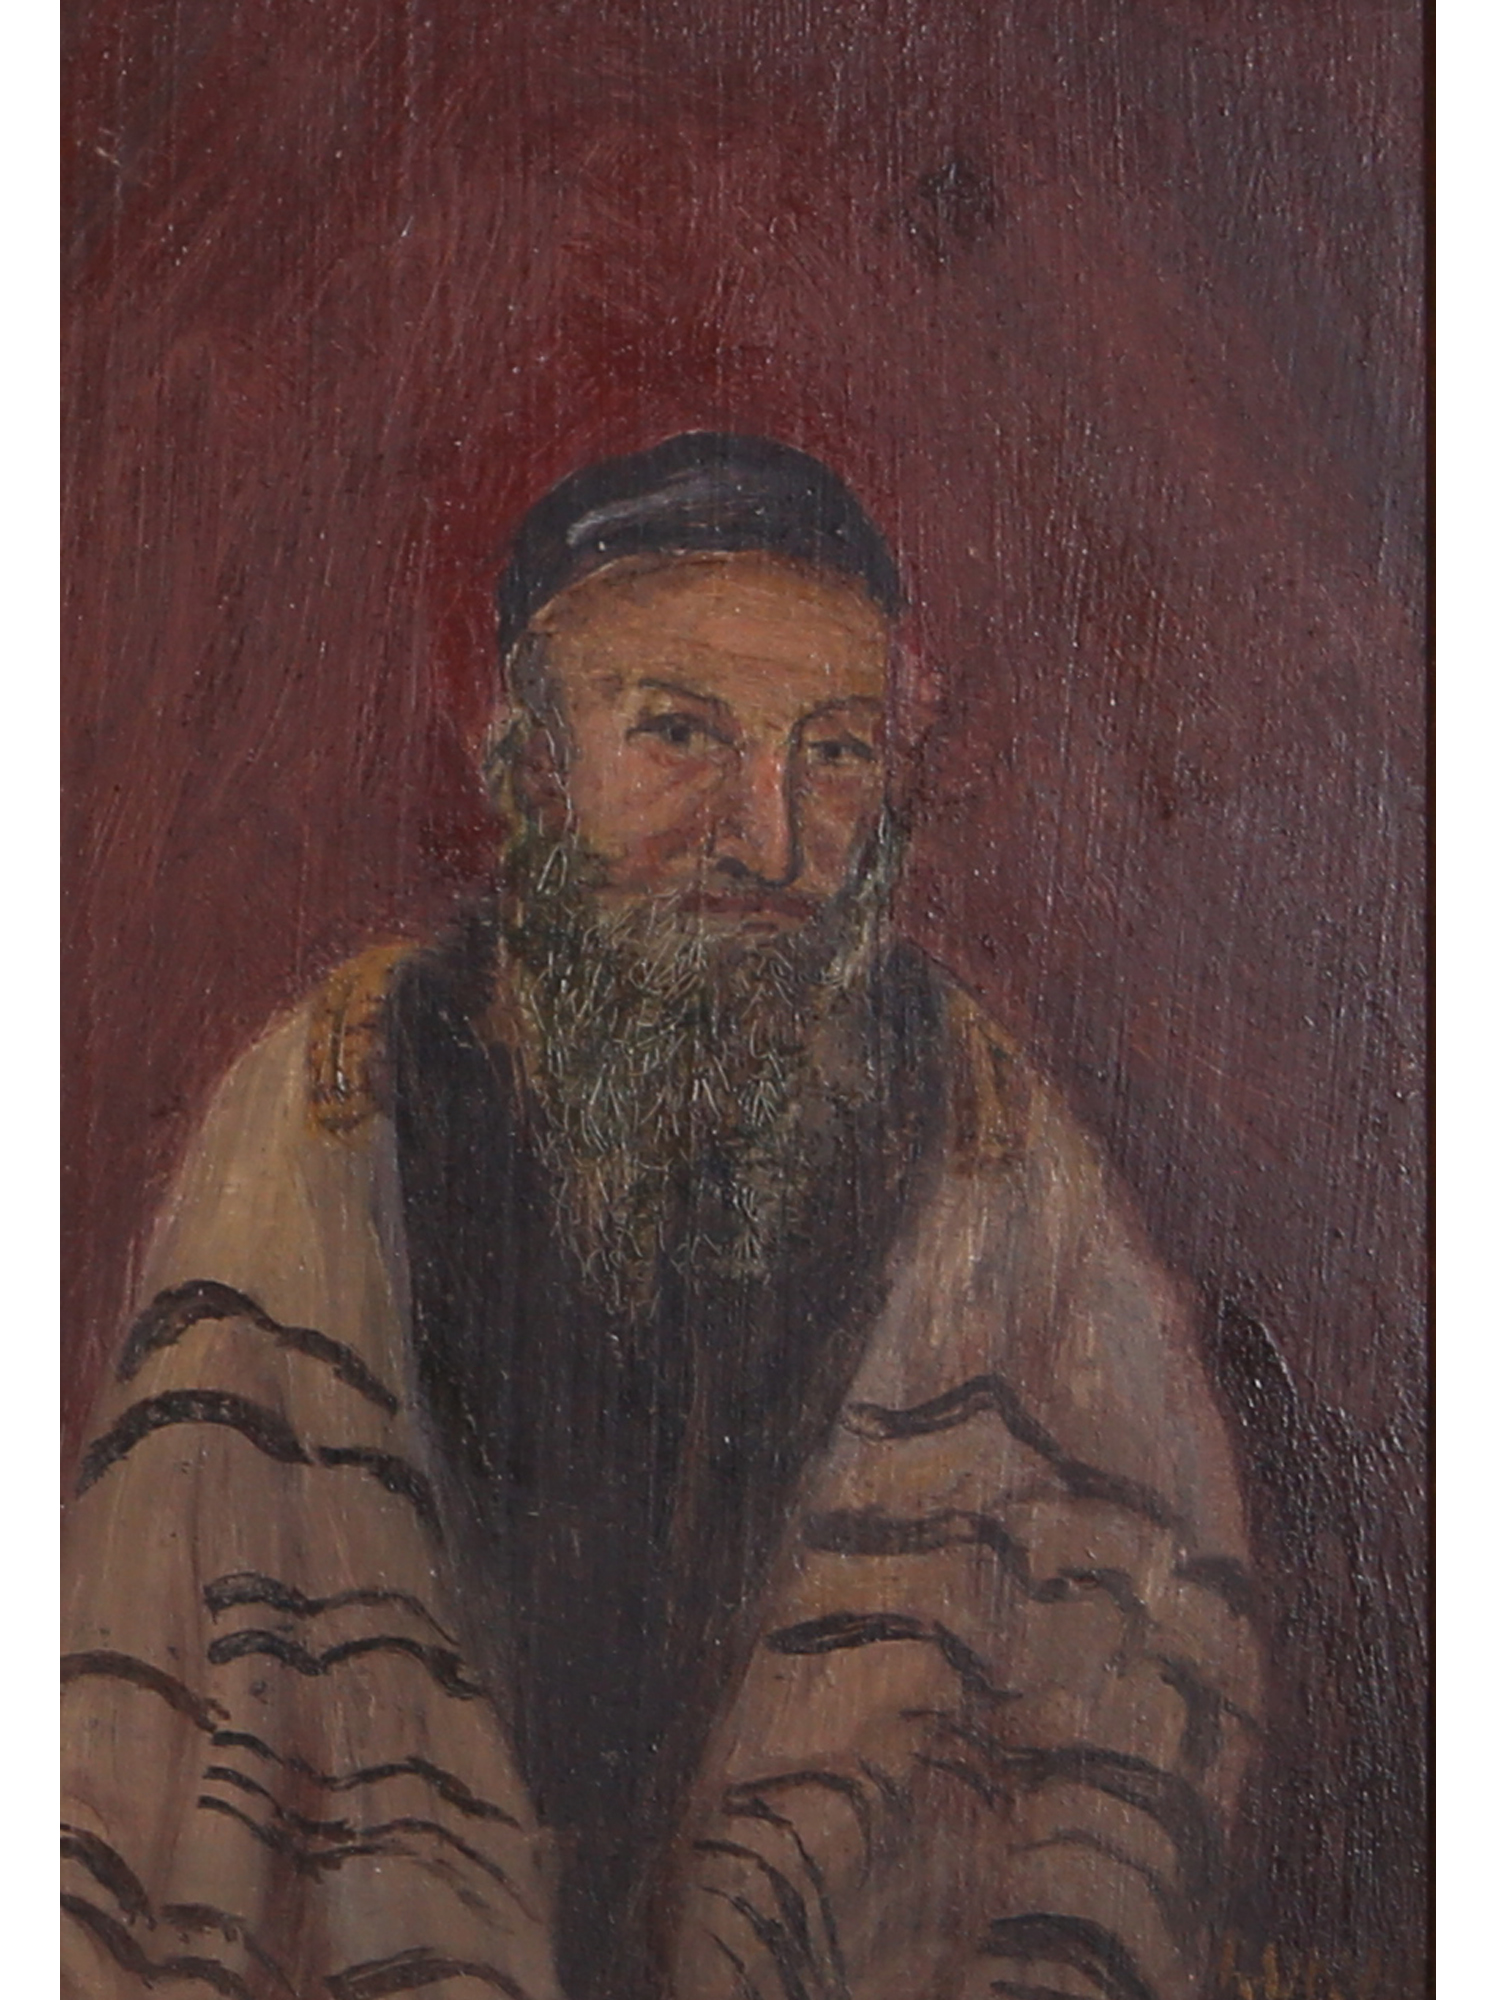 TWO JUDAICA ART PAINTINGS MALE PORTRAITS SIGNED PIC-2